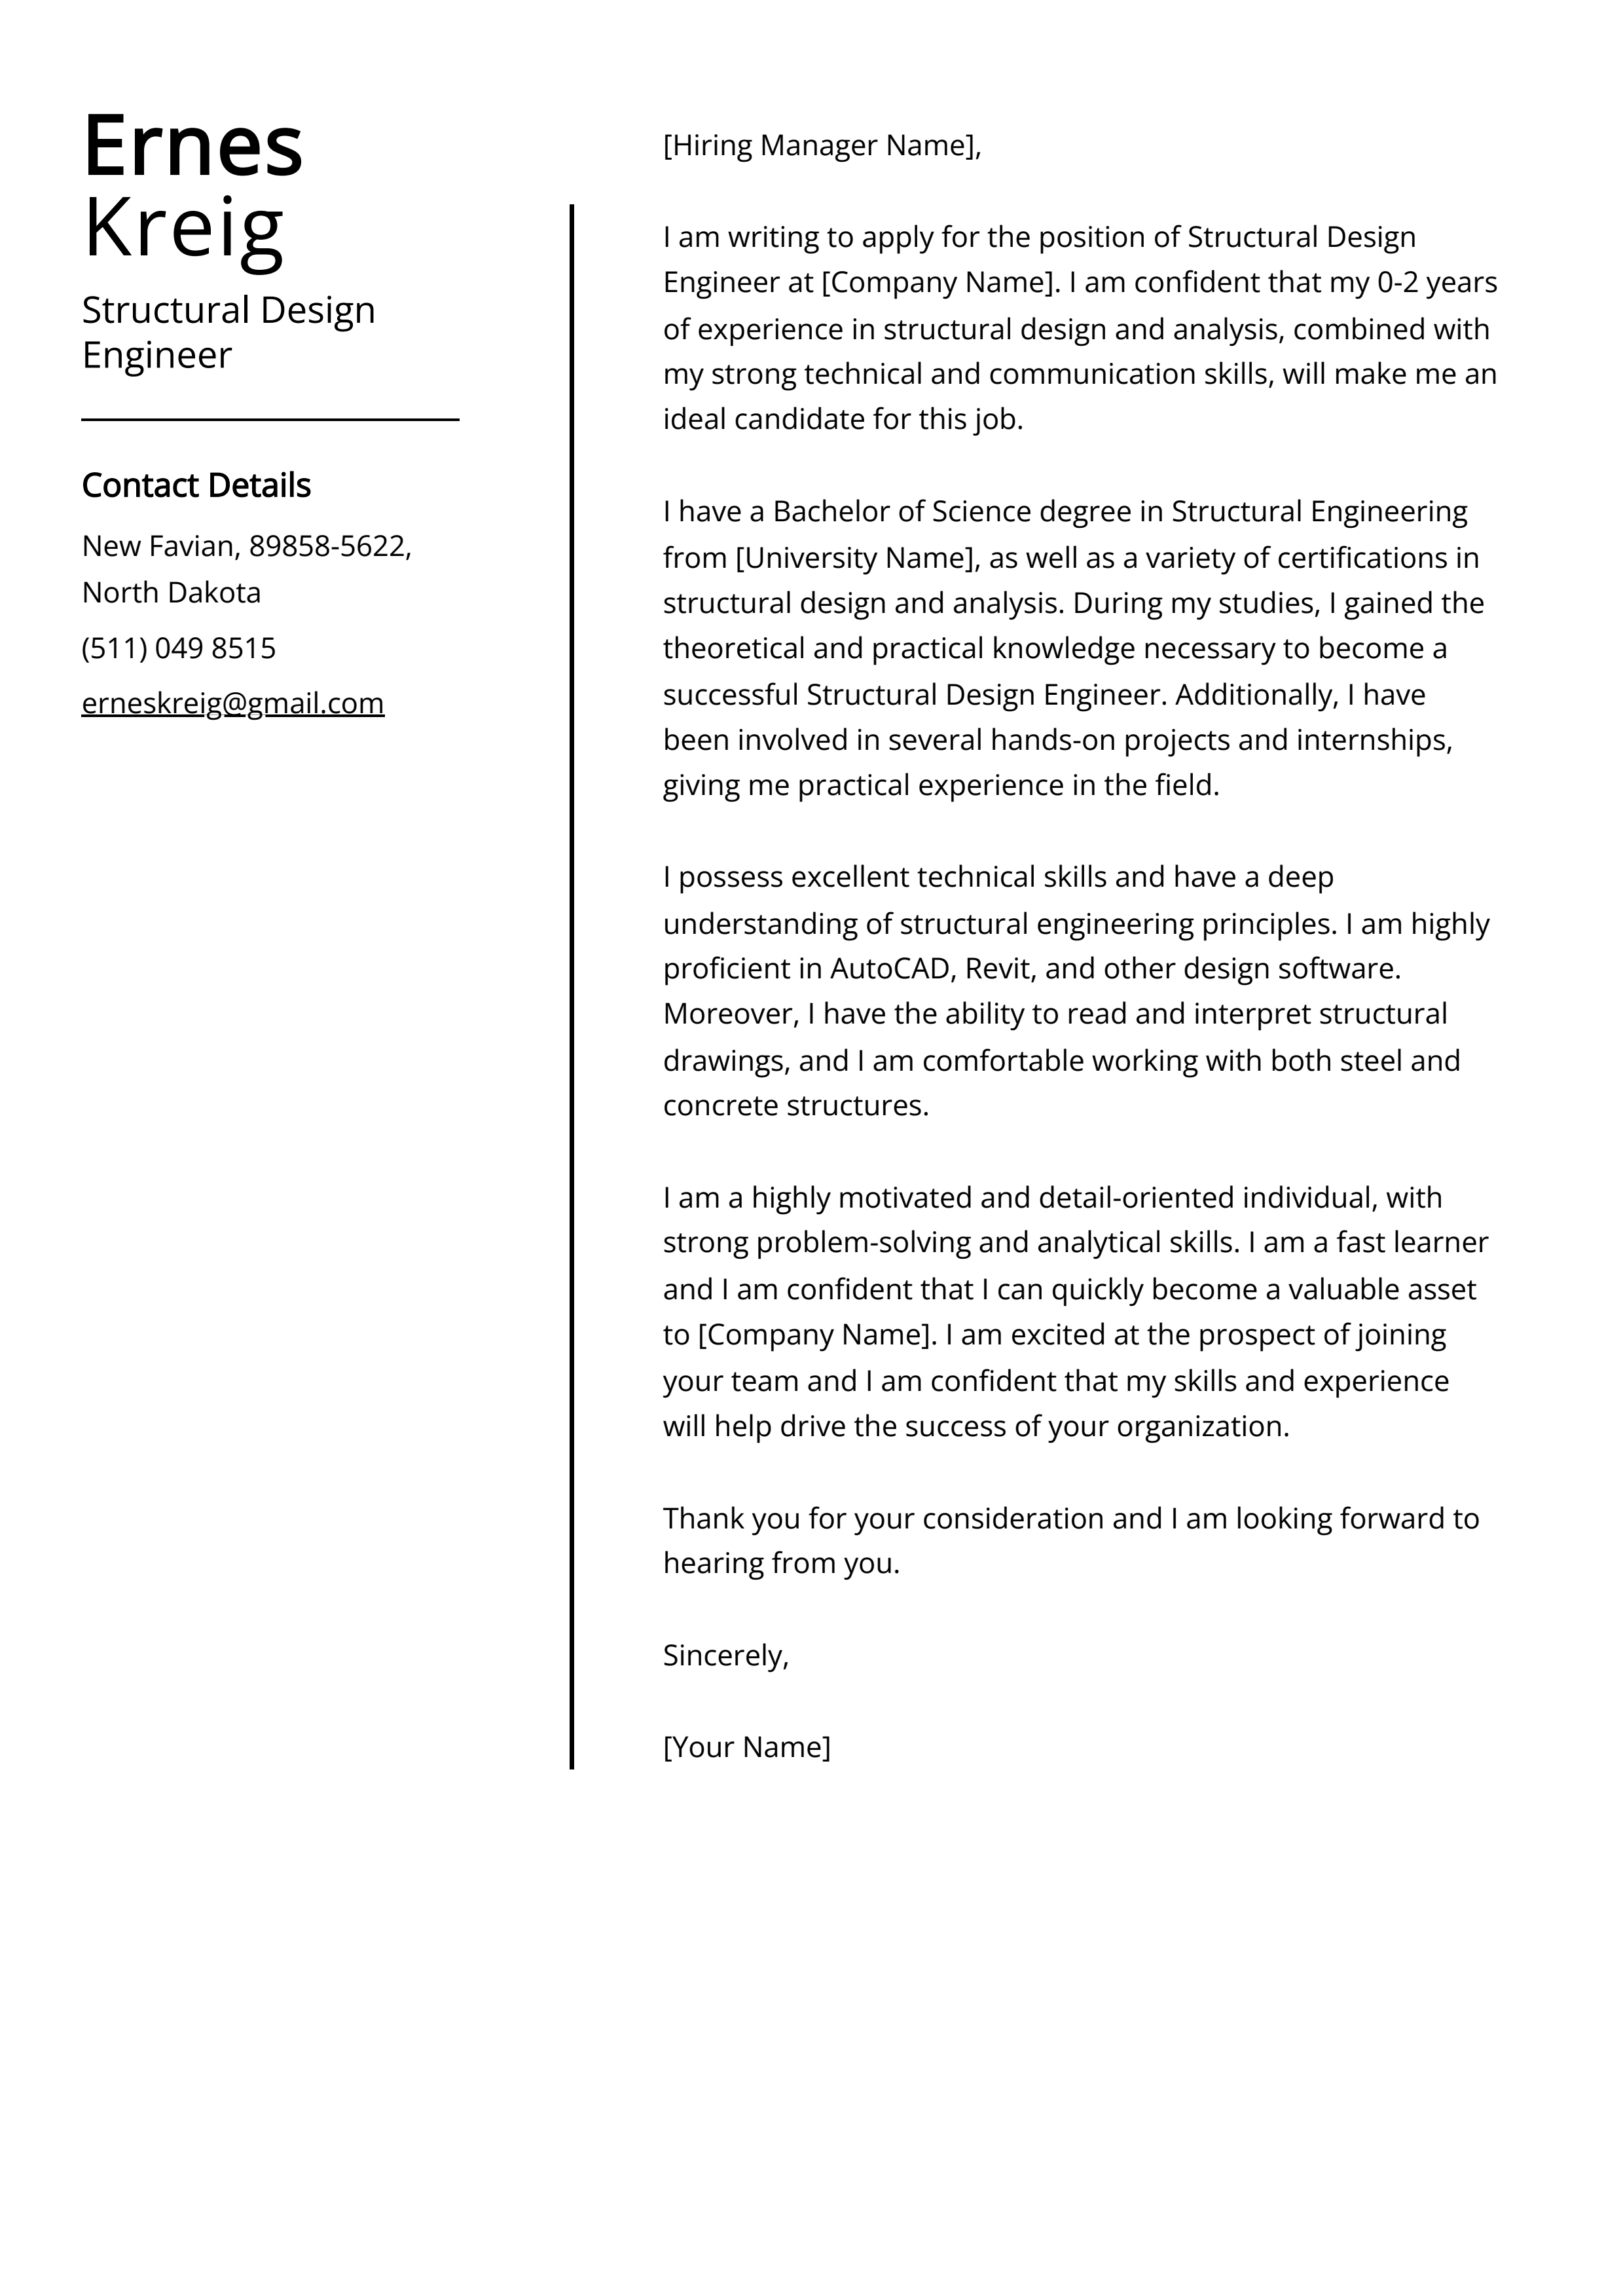 Structural Design Engineer Cover Letter Example